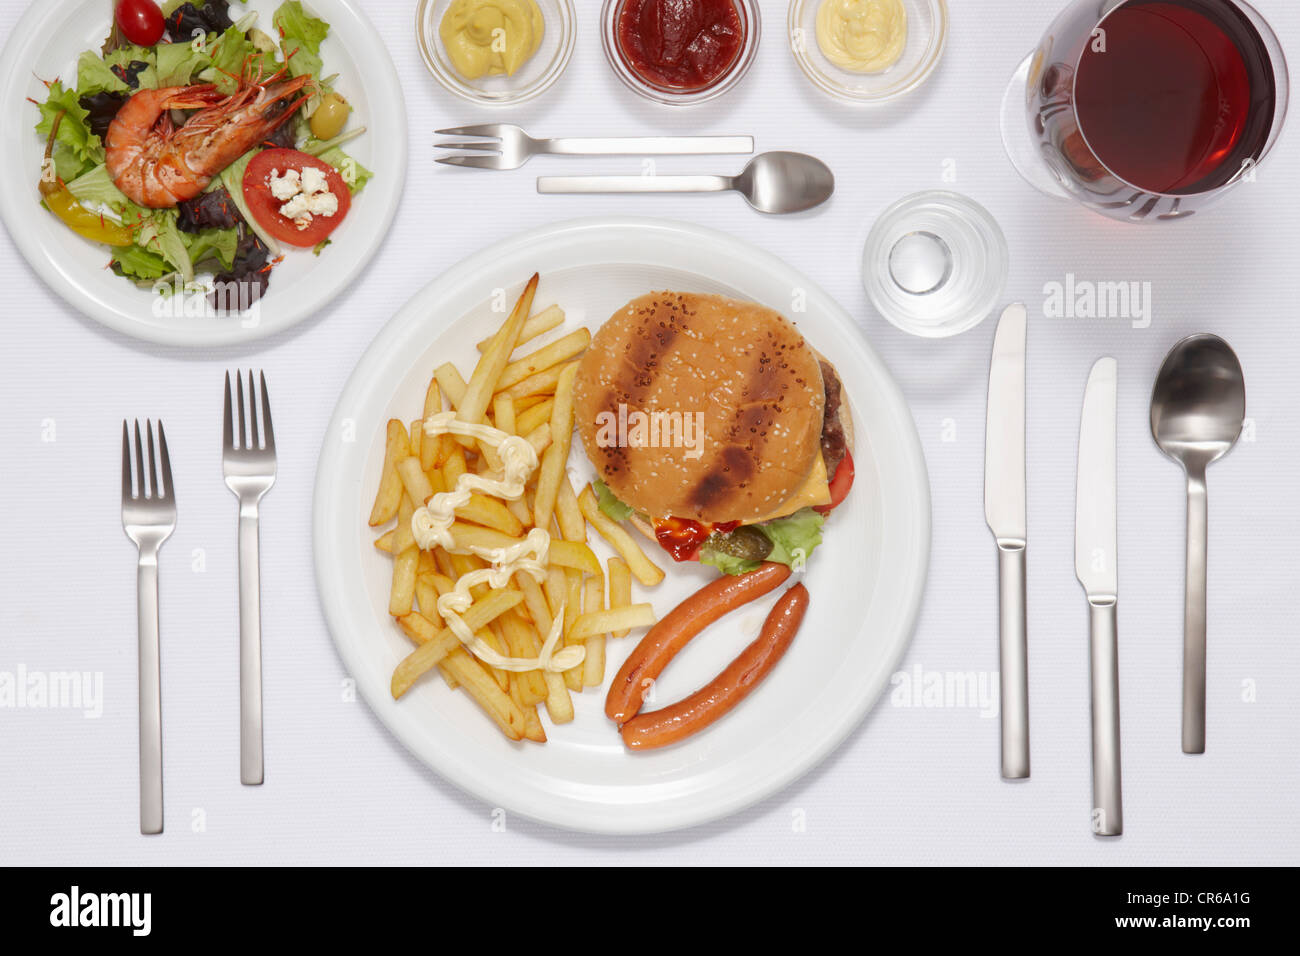 Burger, fries, salad and seafood in plate Stock Photo